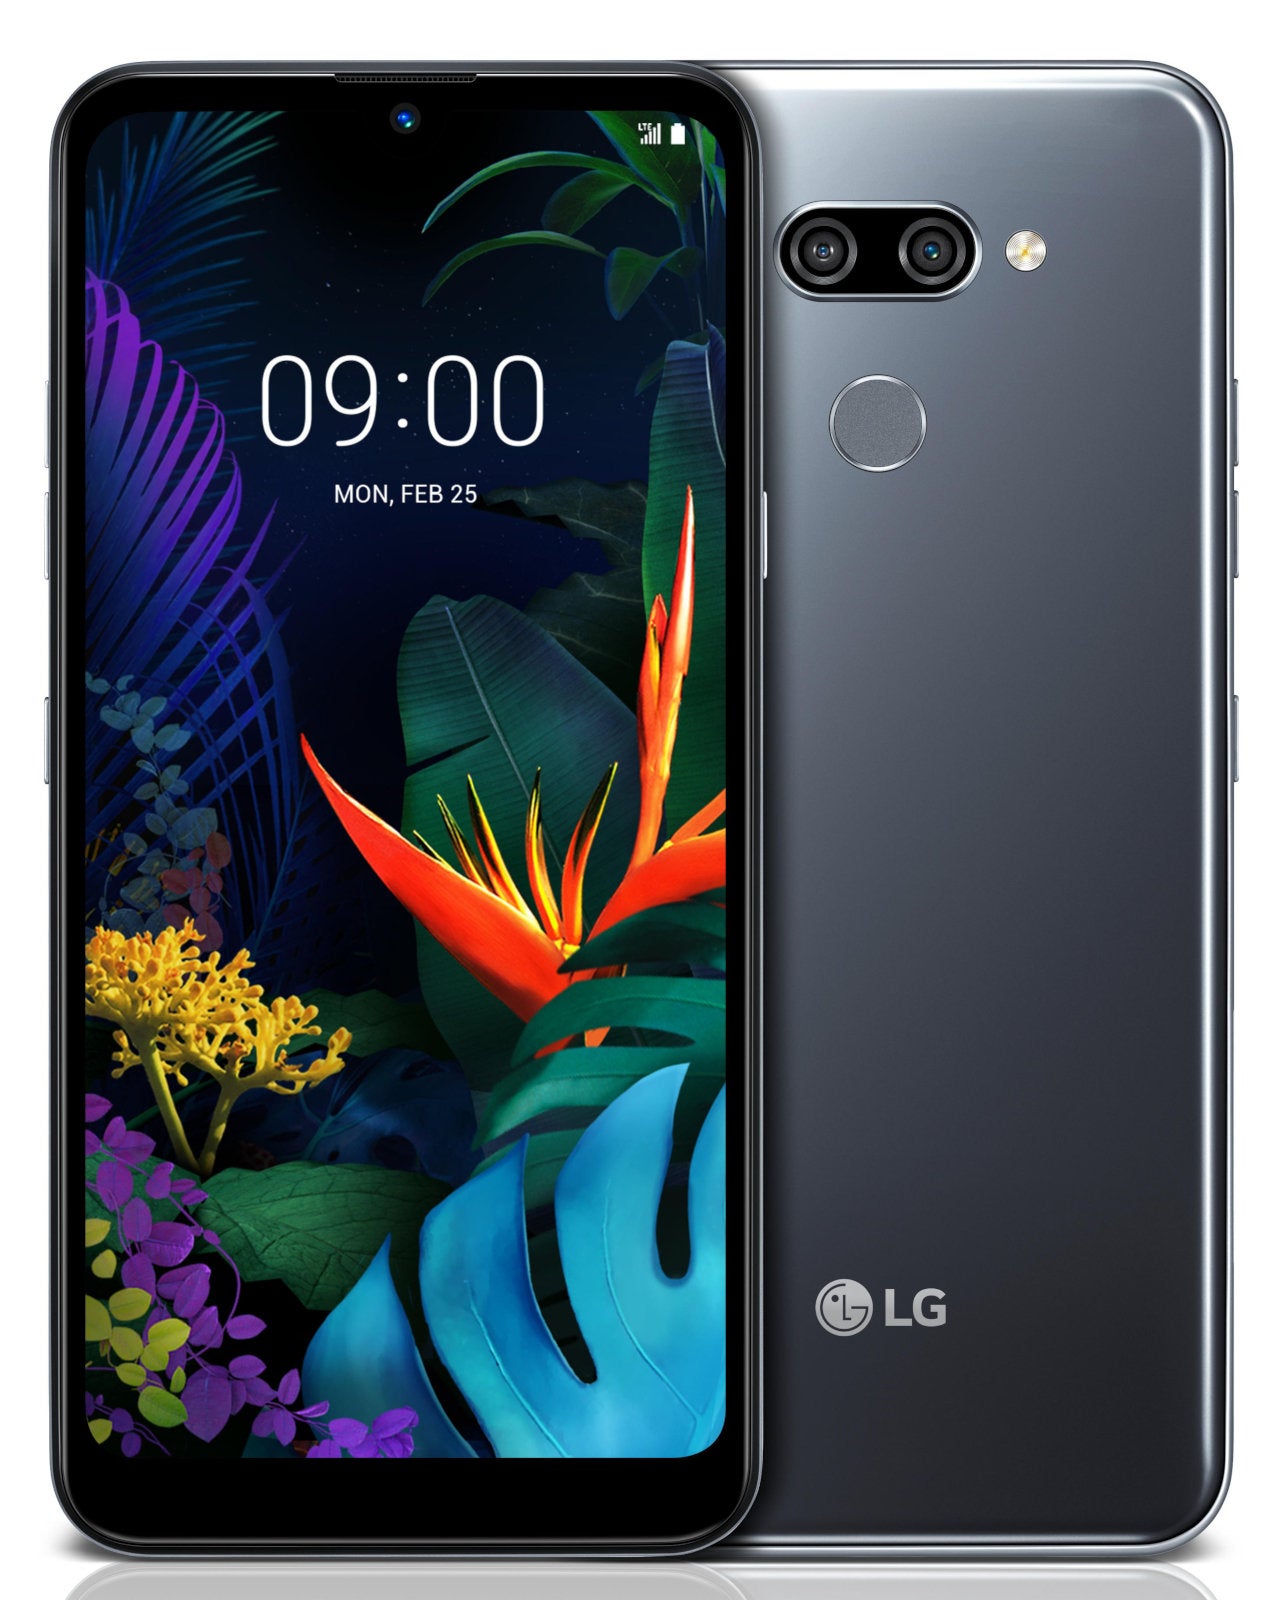 LG K50 - LG's trio of mid-tier smartphones, Q60, K50 and K40 revealed ahead of MWC 2019